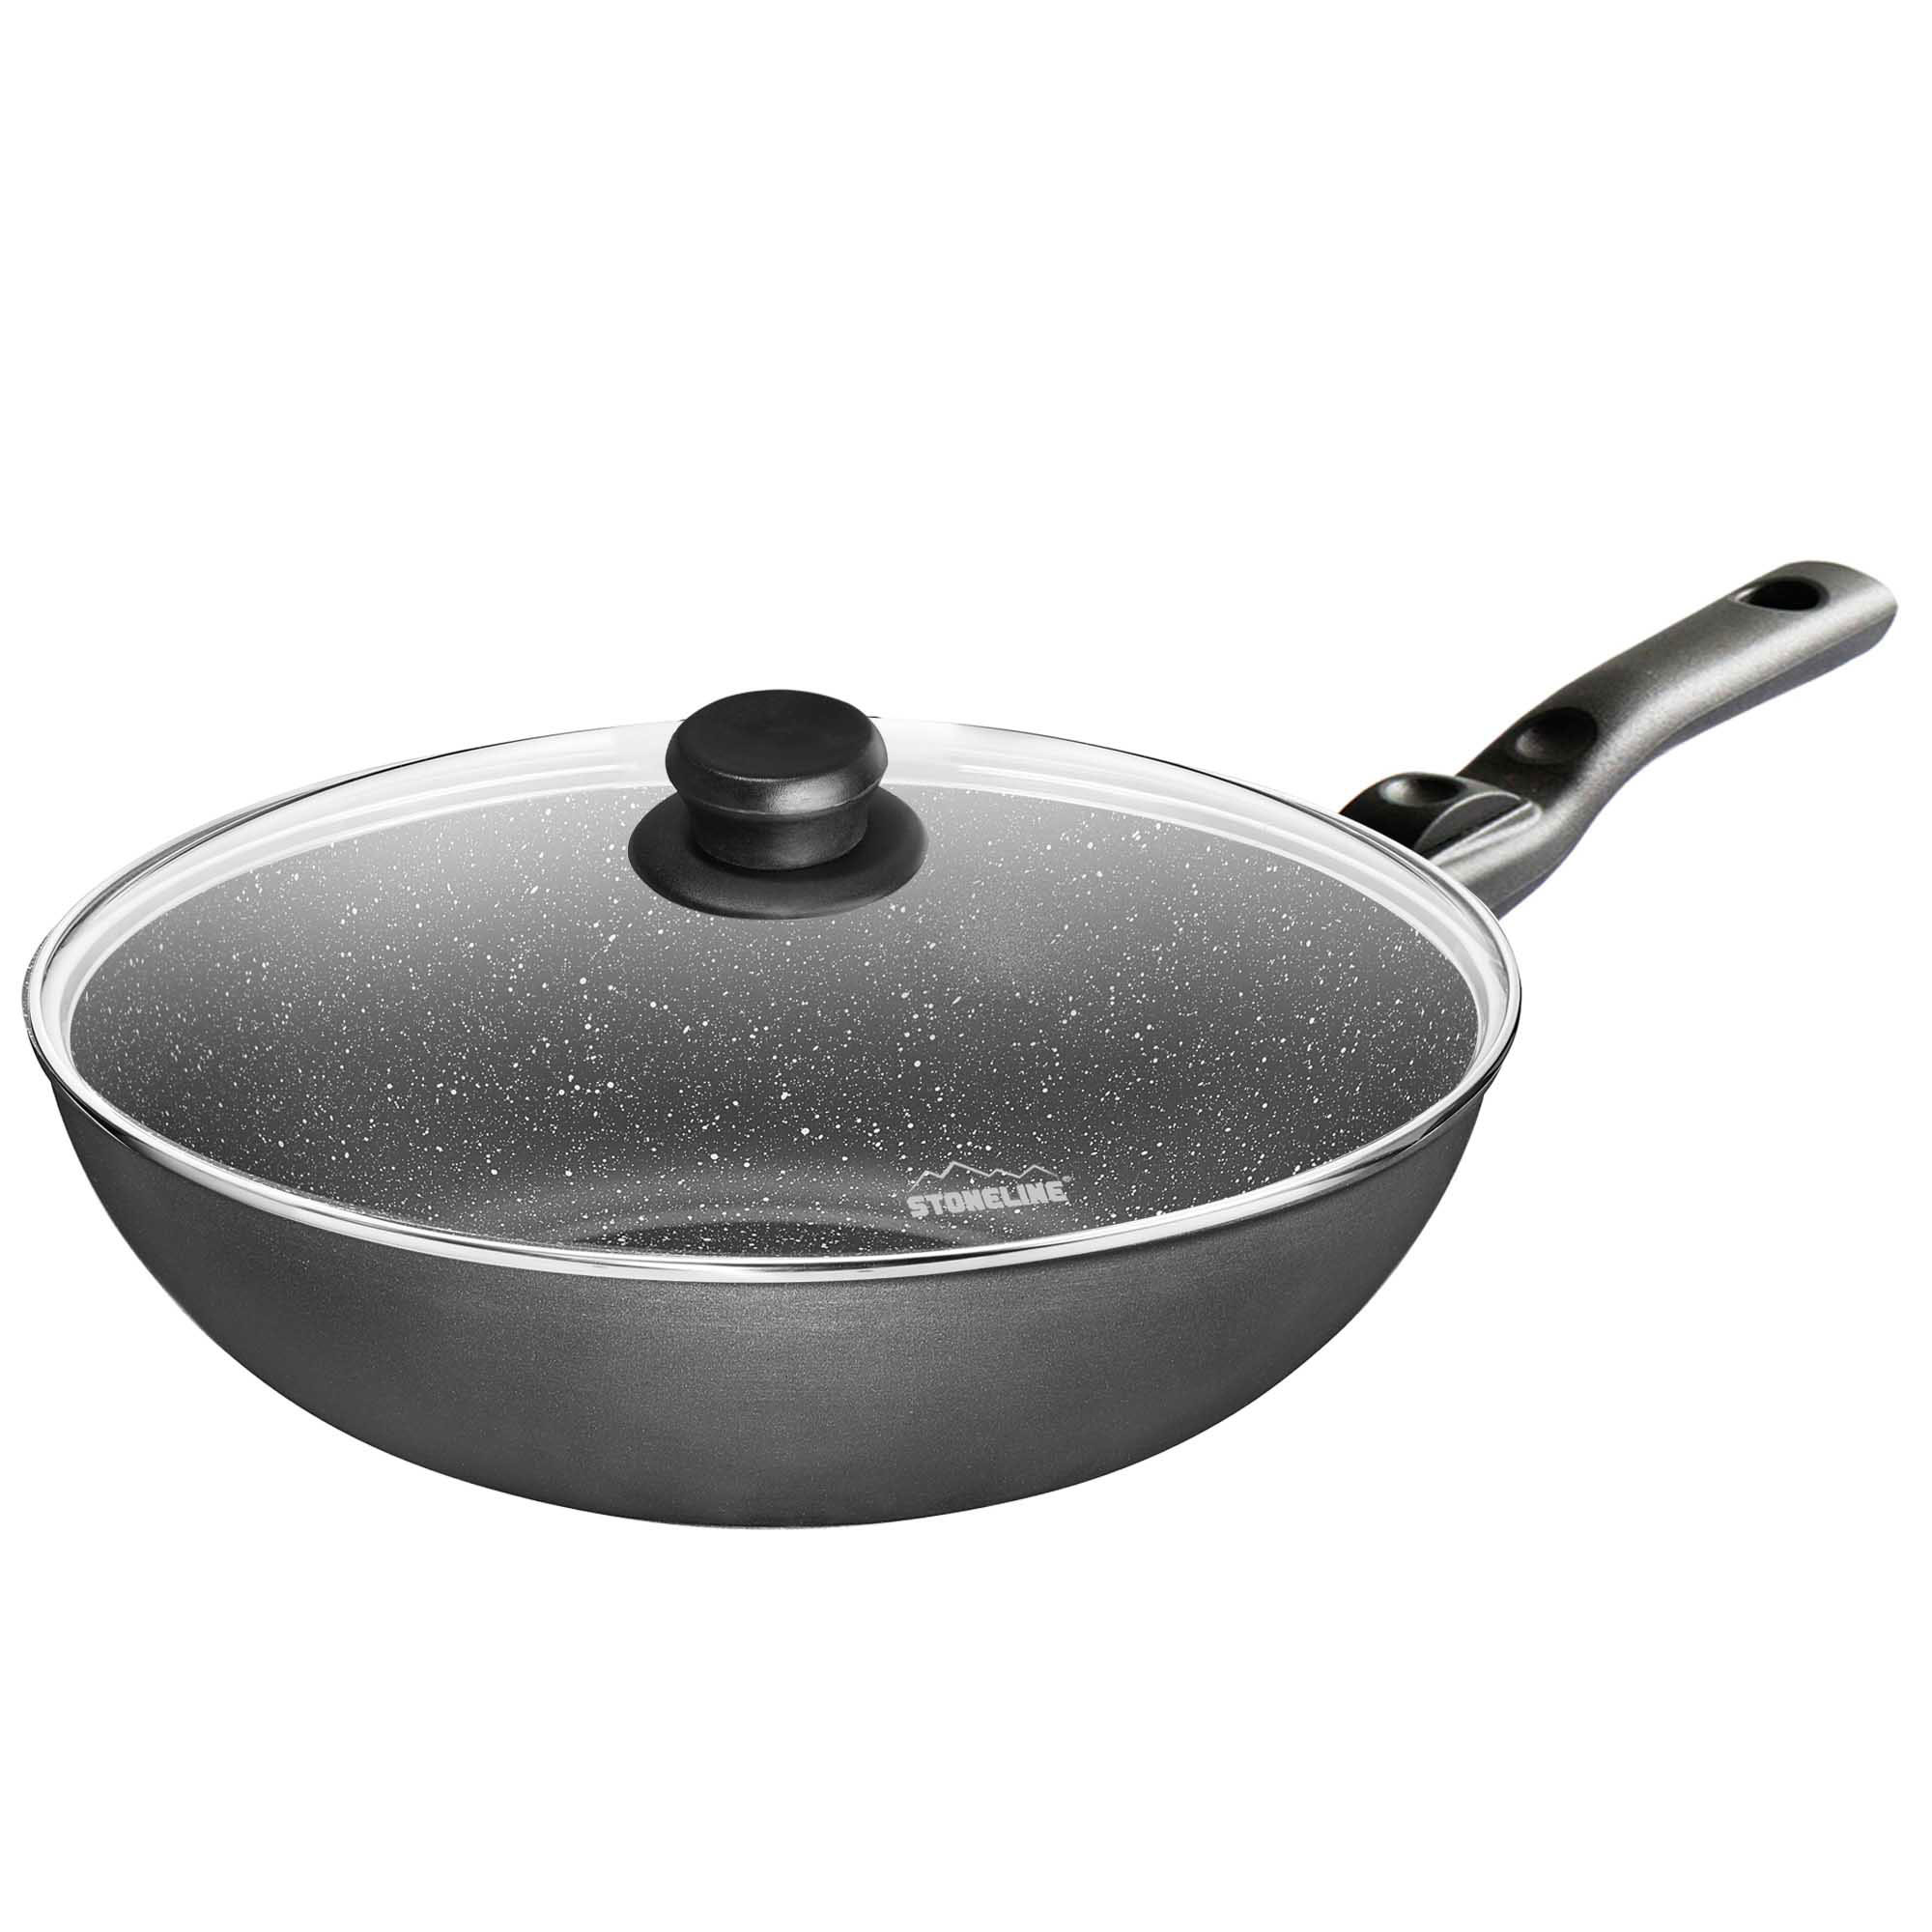 STONELINE® Wok Pan 30 cm, Removable Handle, Lid, Non-Stick | Made in Germany | FLEX